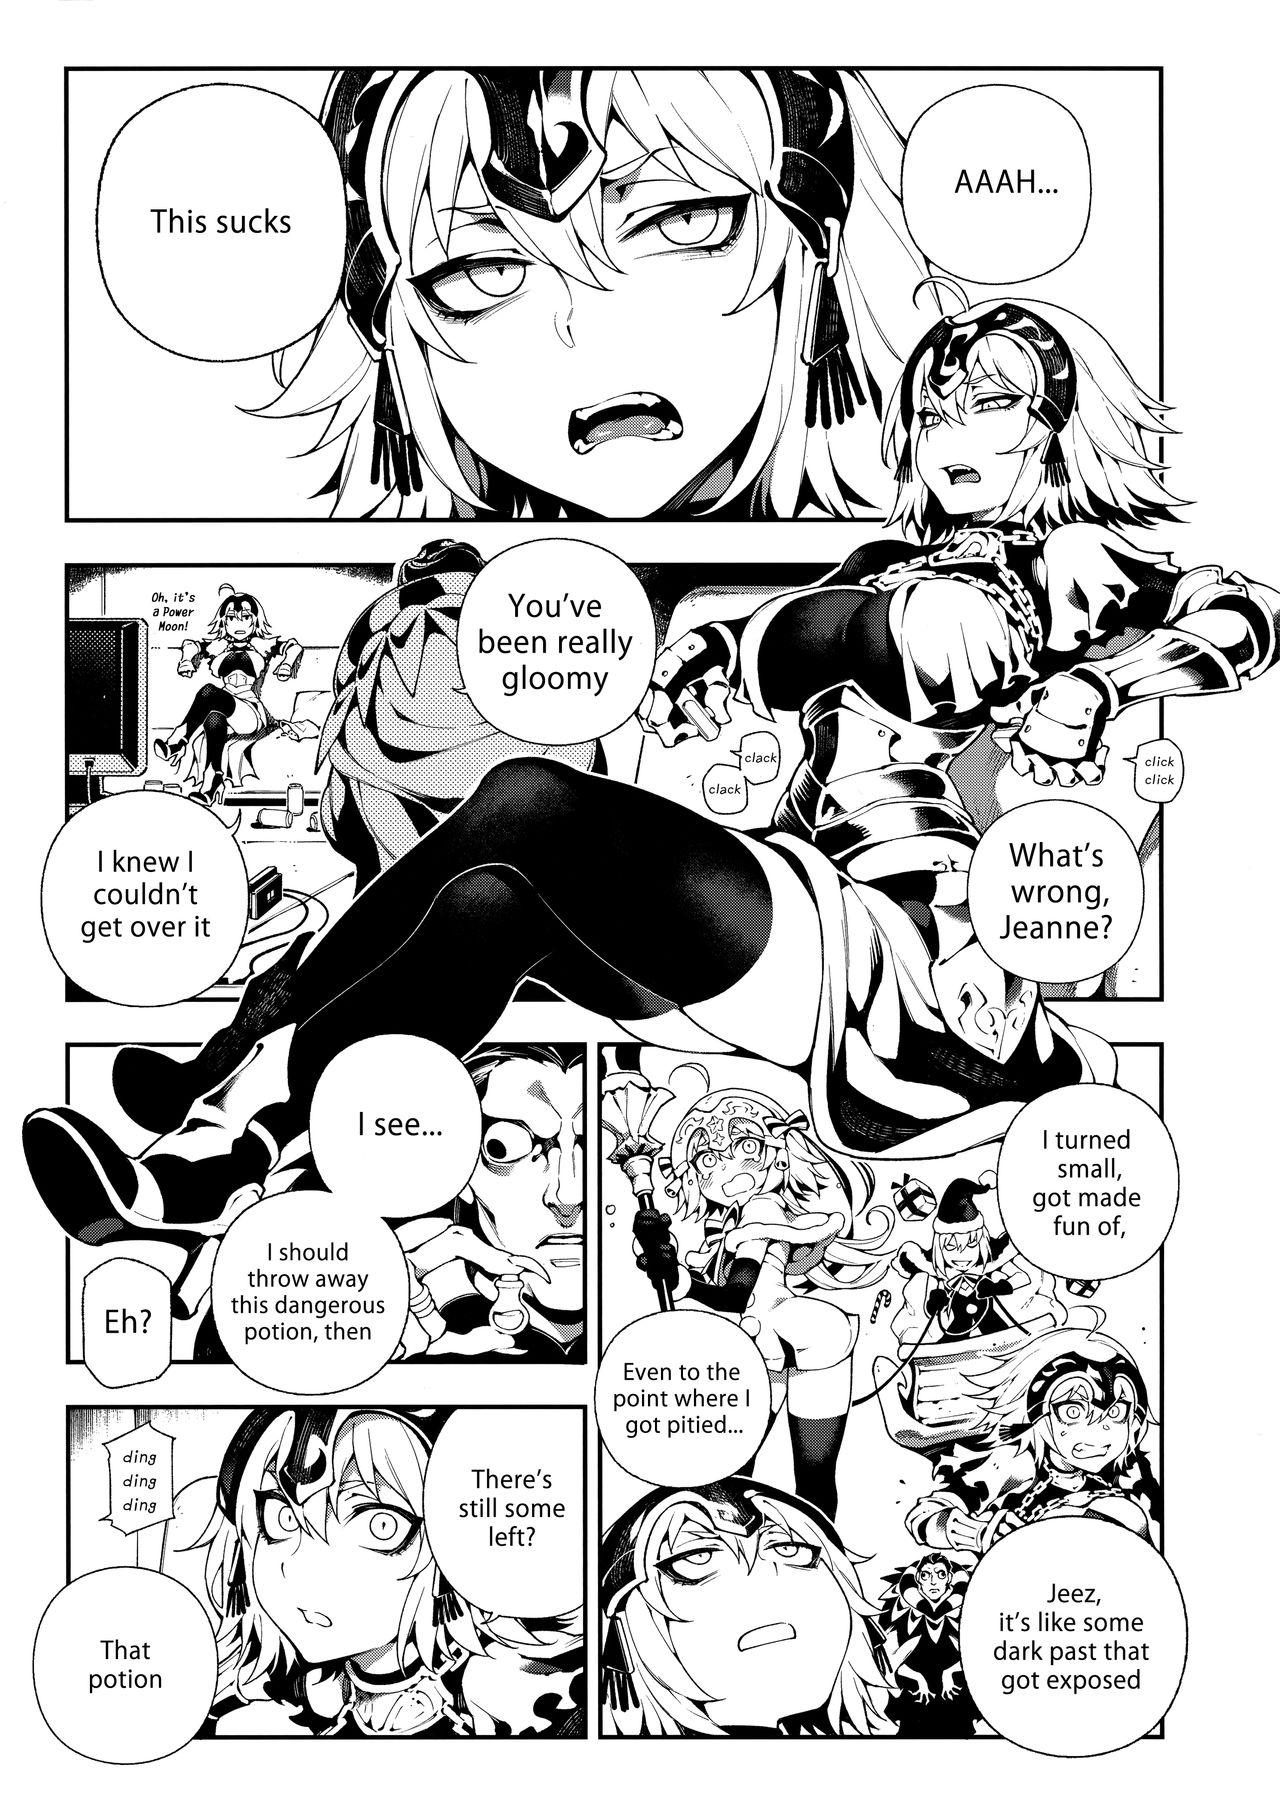 Family Taboo CHALDEA MANIA - Jeanne Alter - Fate grand order Gay Blondhair - Page 4